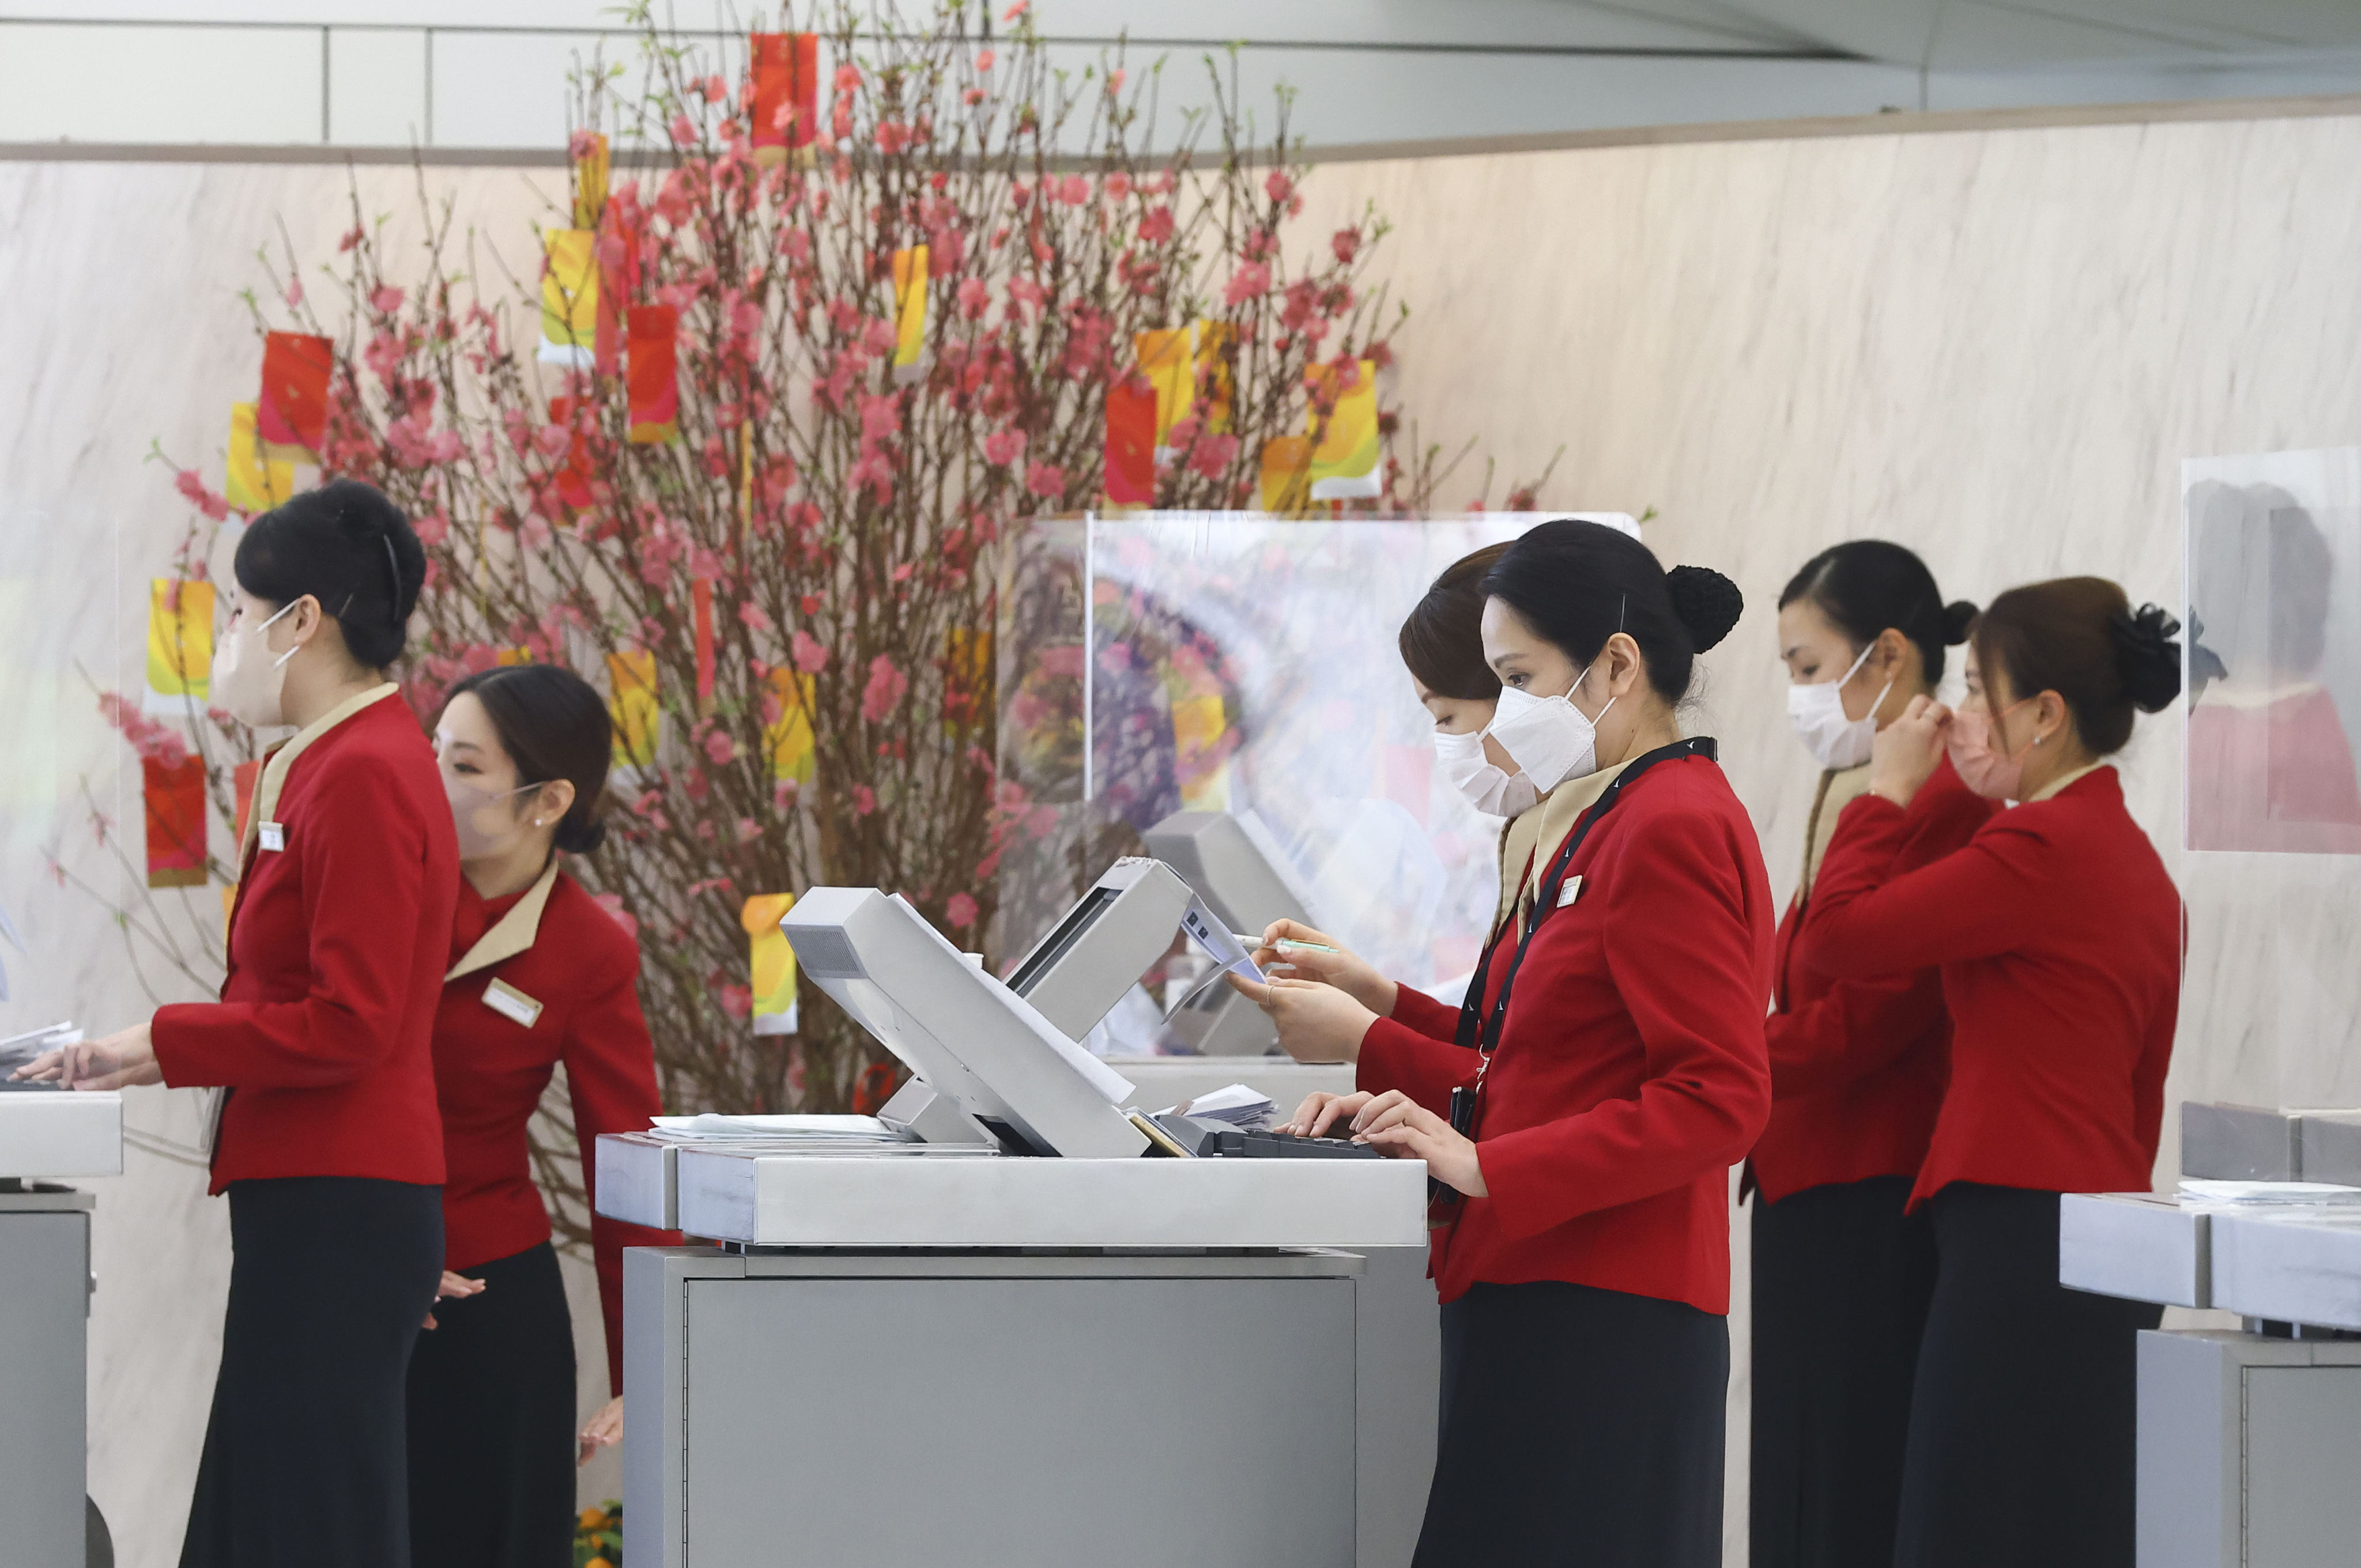 Cathay Pacific staff on duty at Hong Kong airport on January 19, 2023. A recent discrimination scandal saw the airline fire three staff members over insulting comments they made about passengers. Photo: Dickson Lee